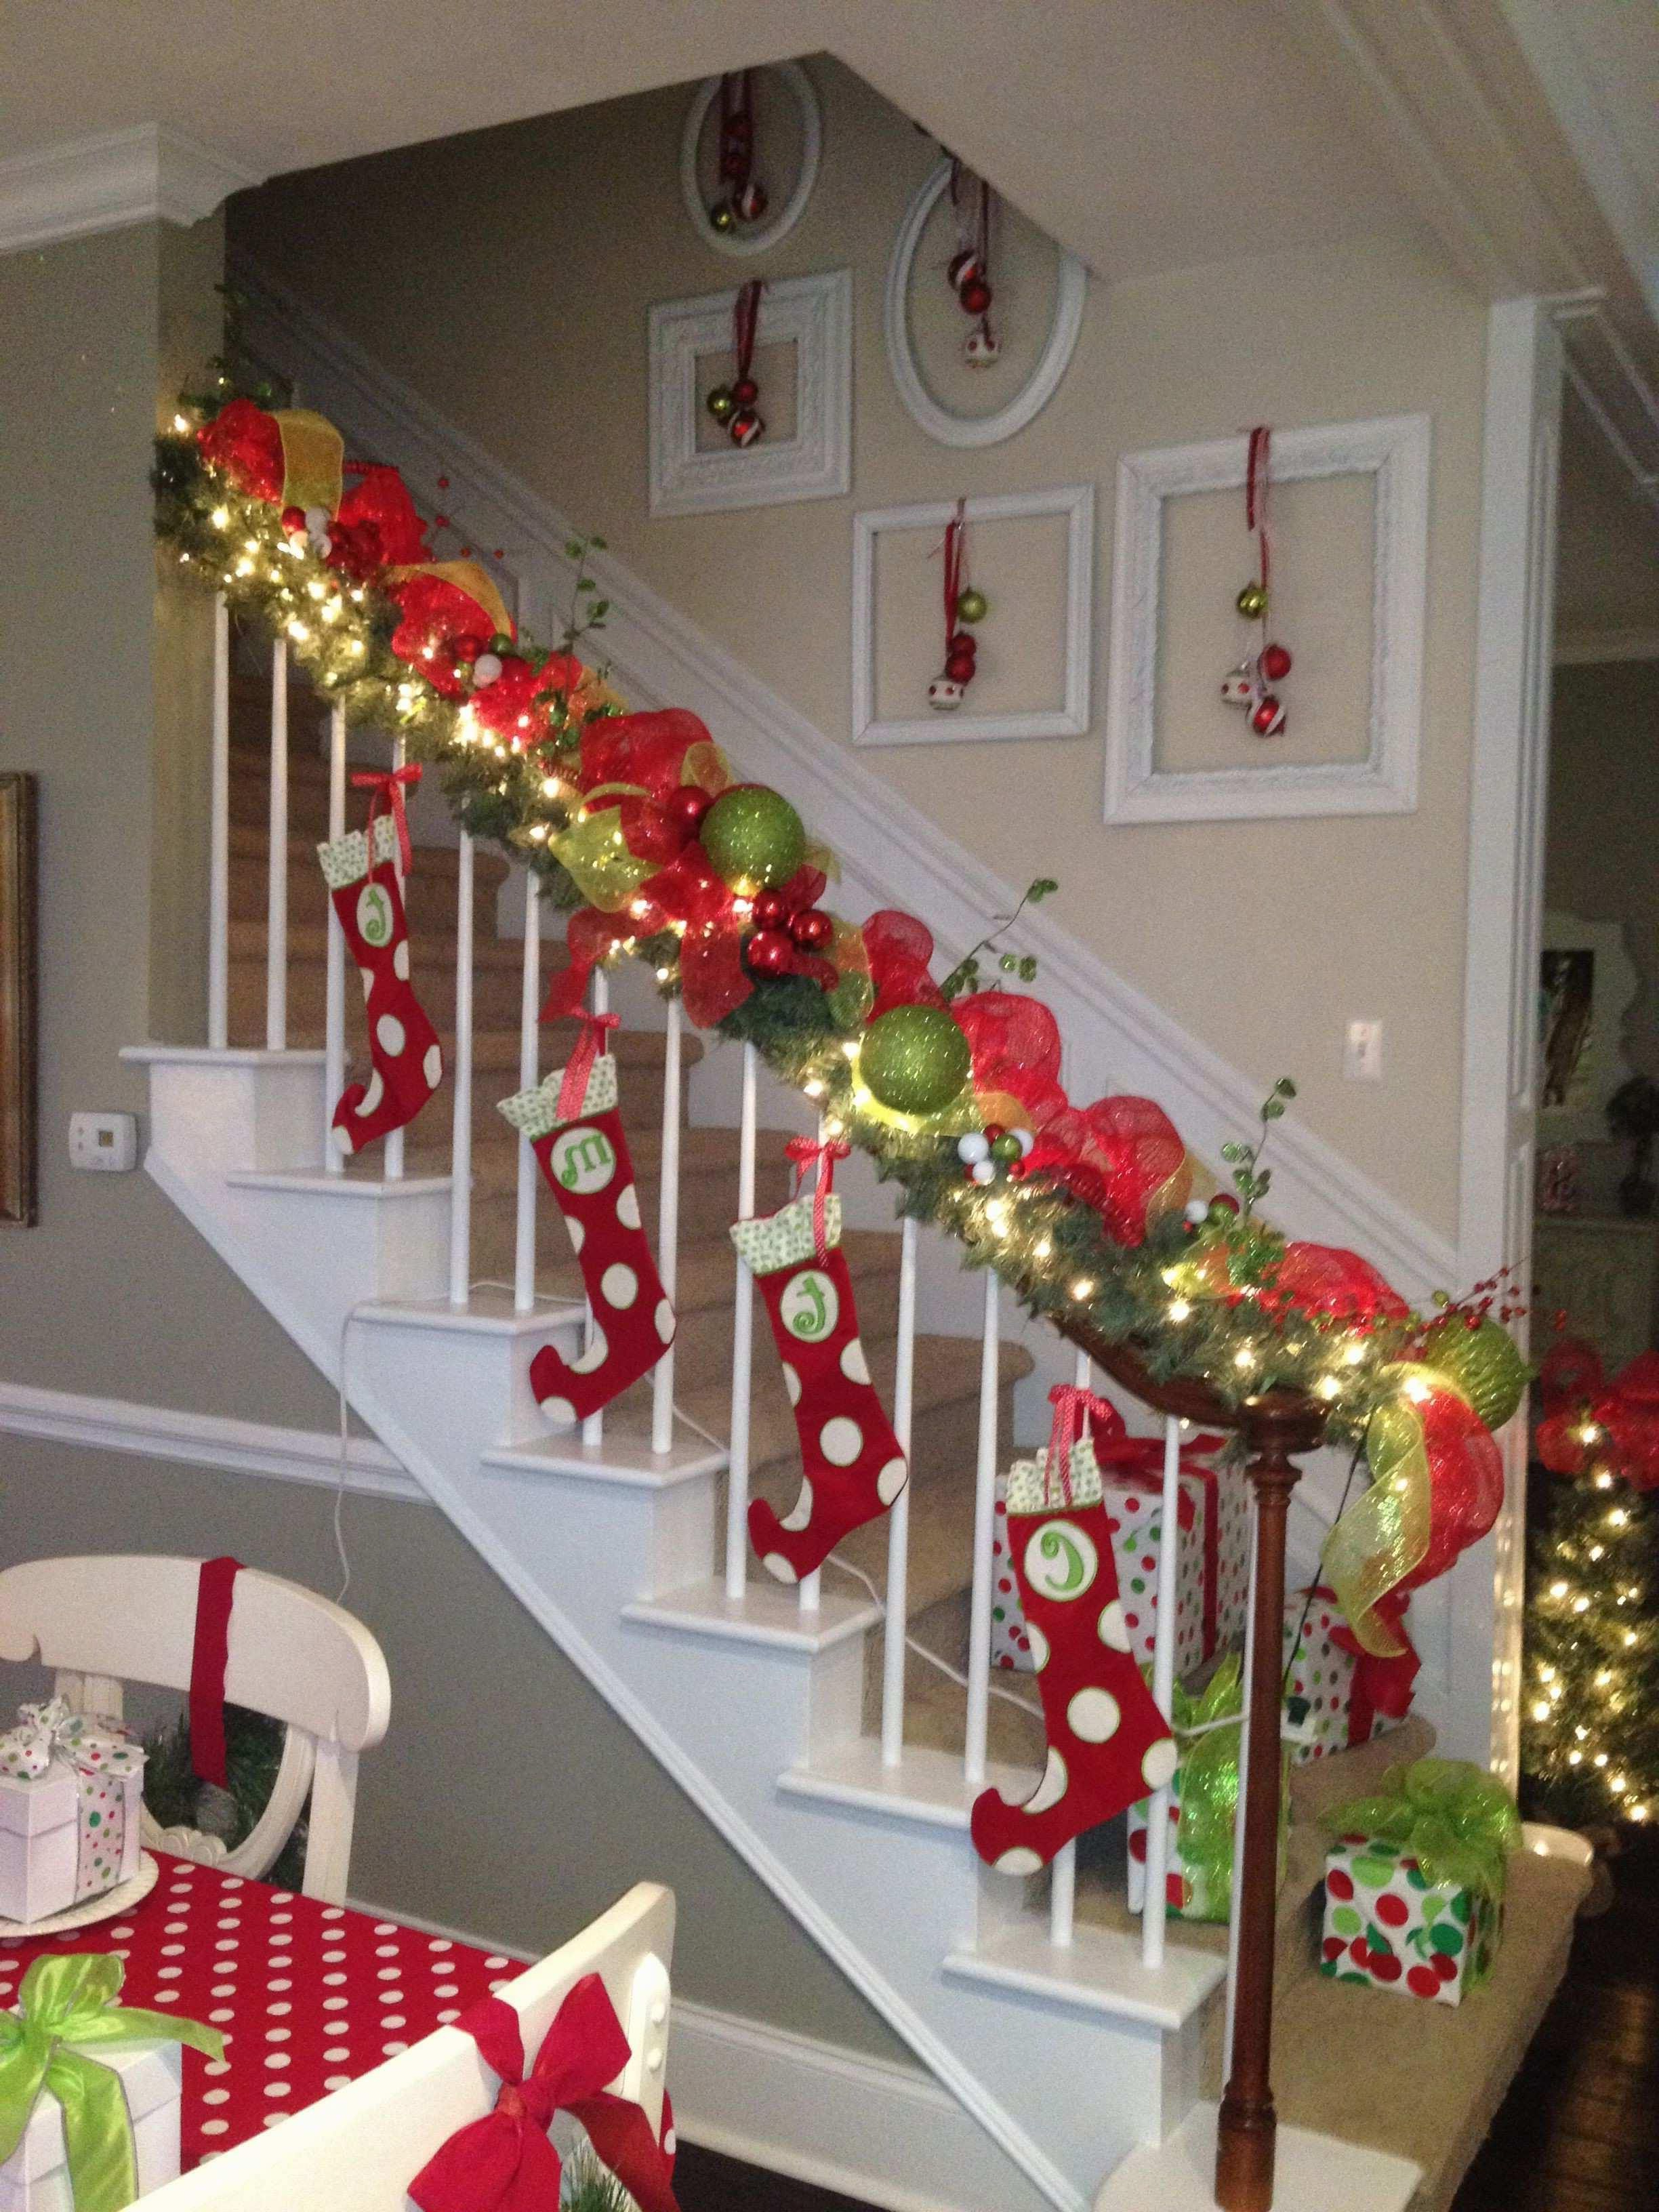 Decorating Banisters For Christmas With Ribbon